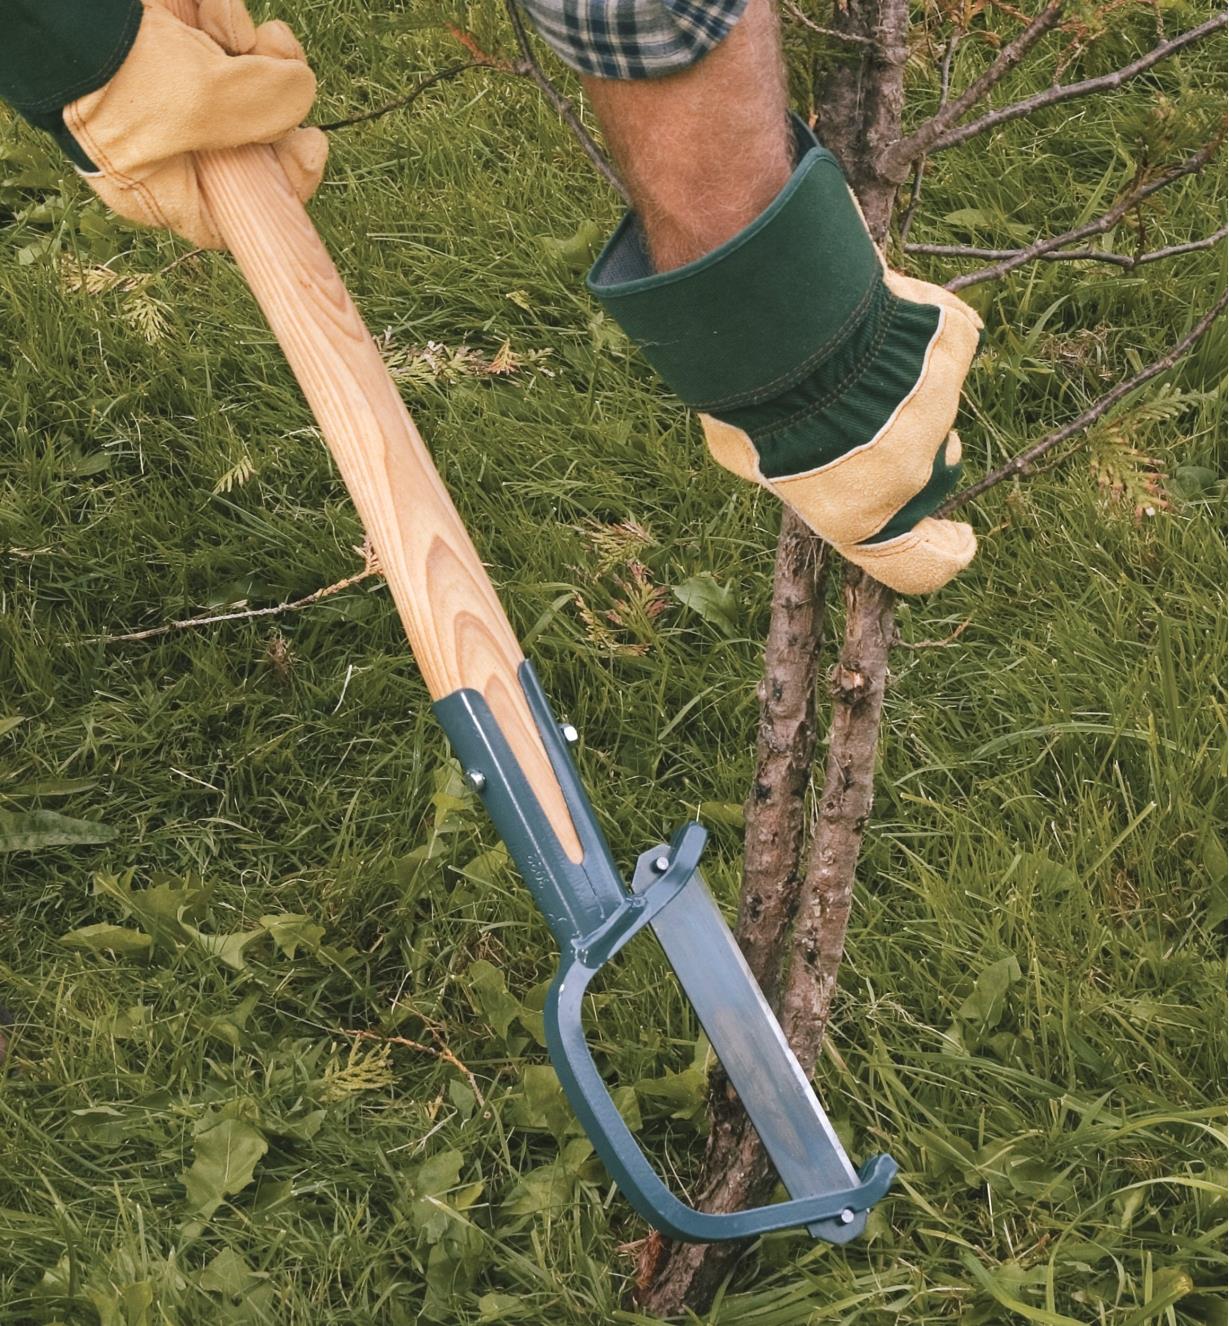 Using the Clearing Axe to remove a small tree